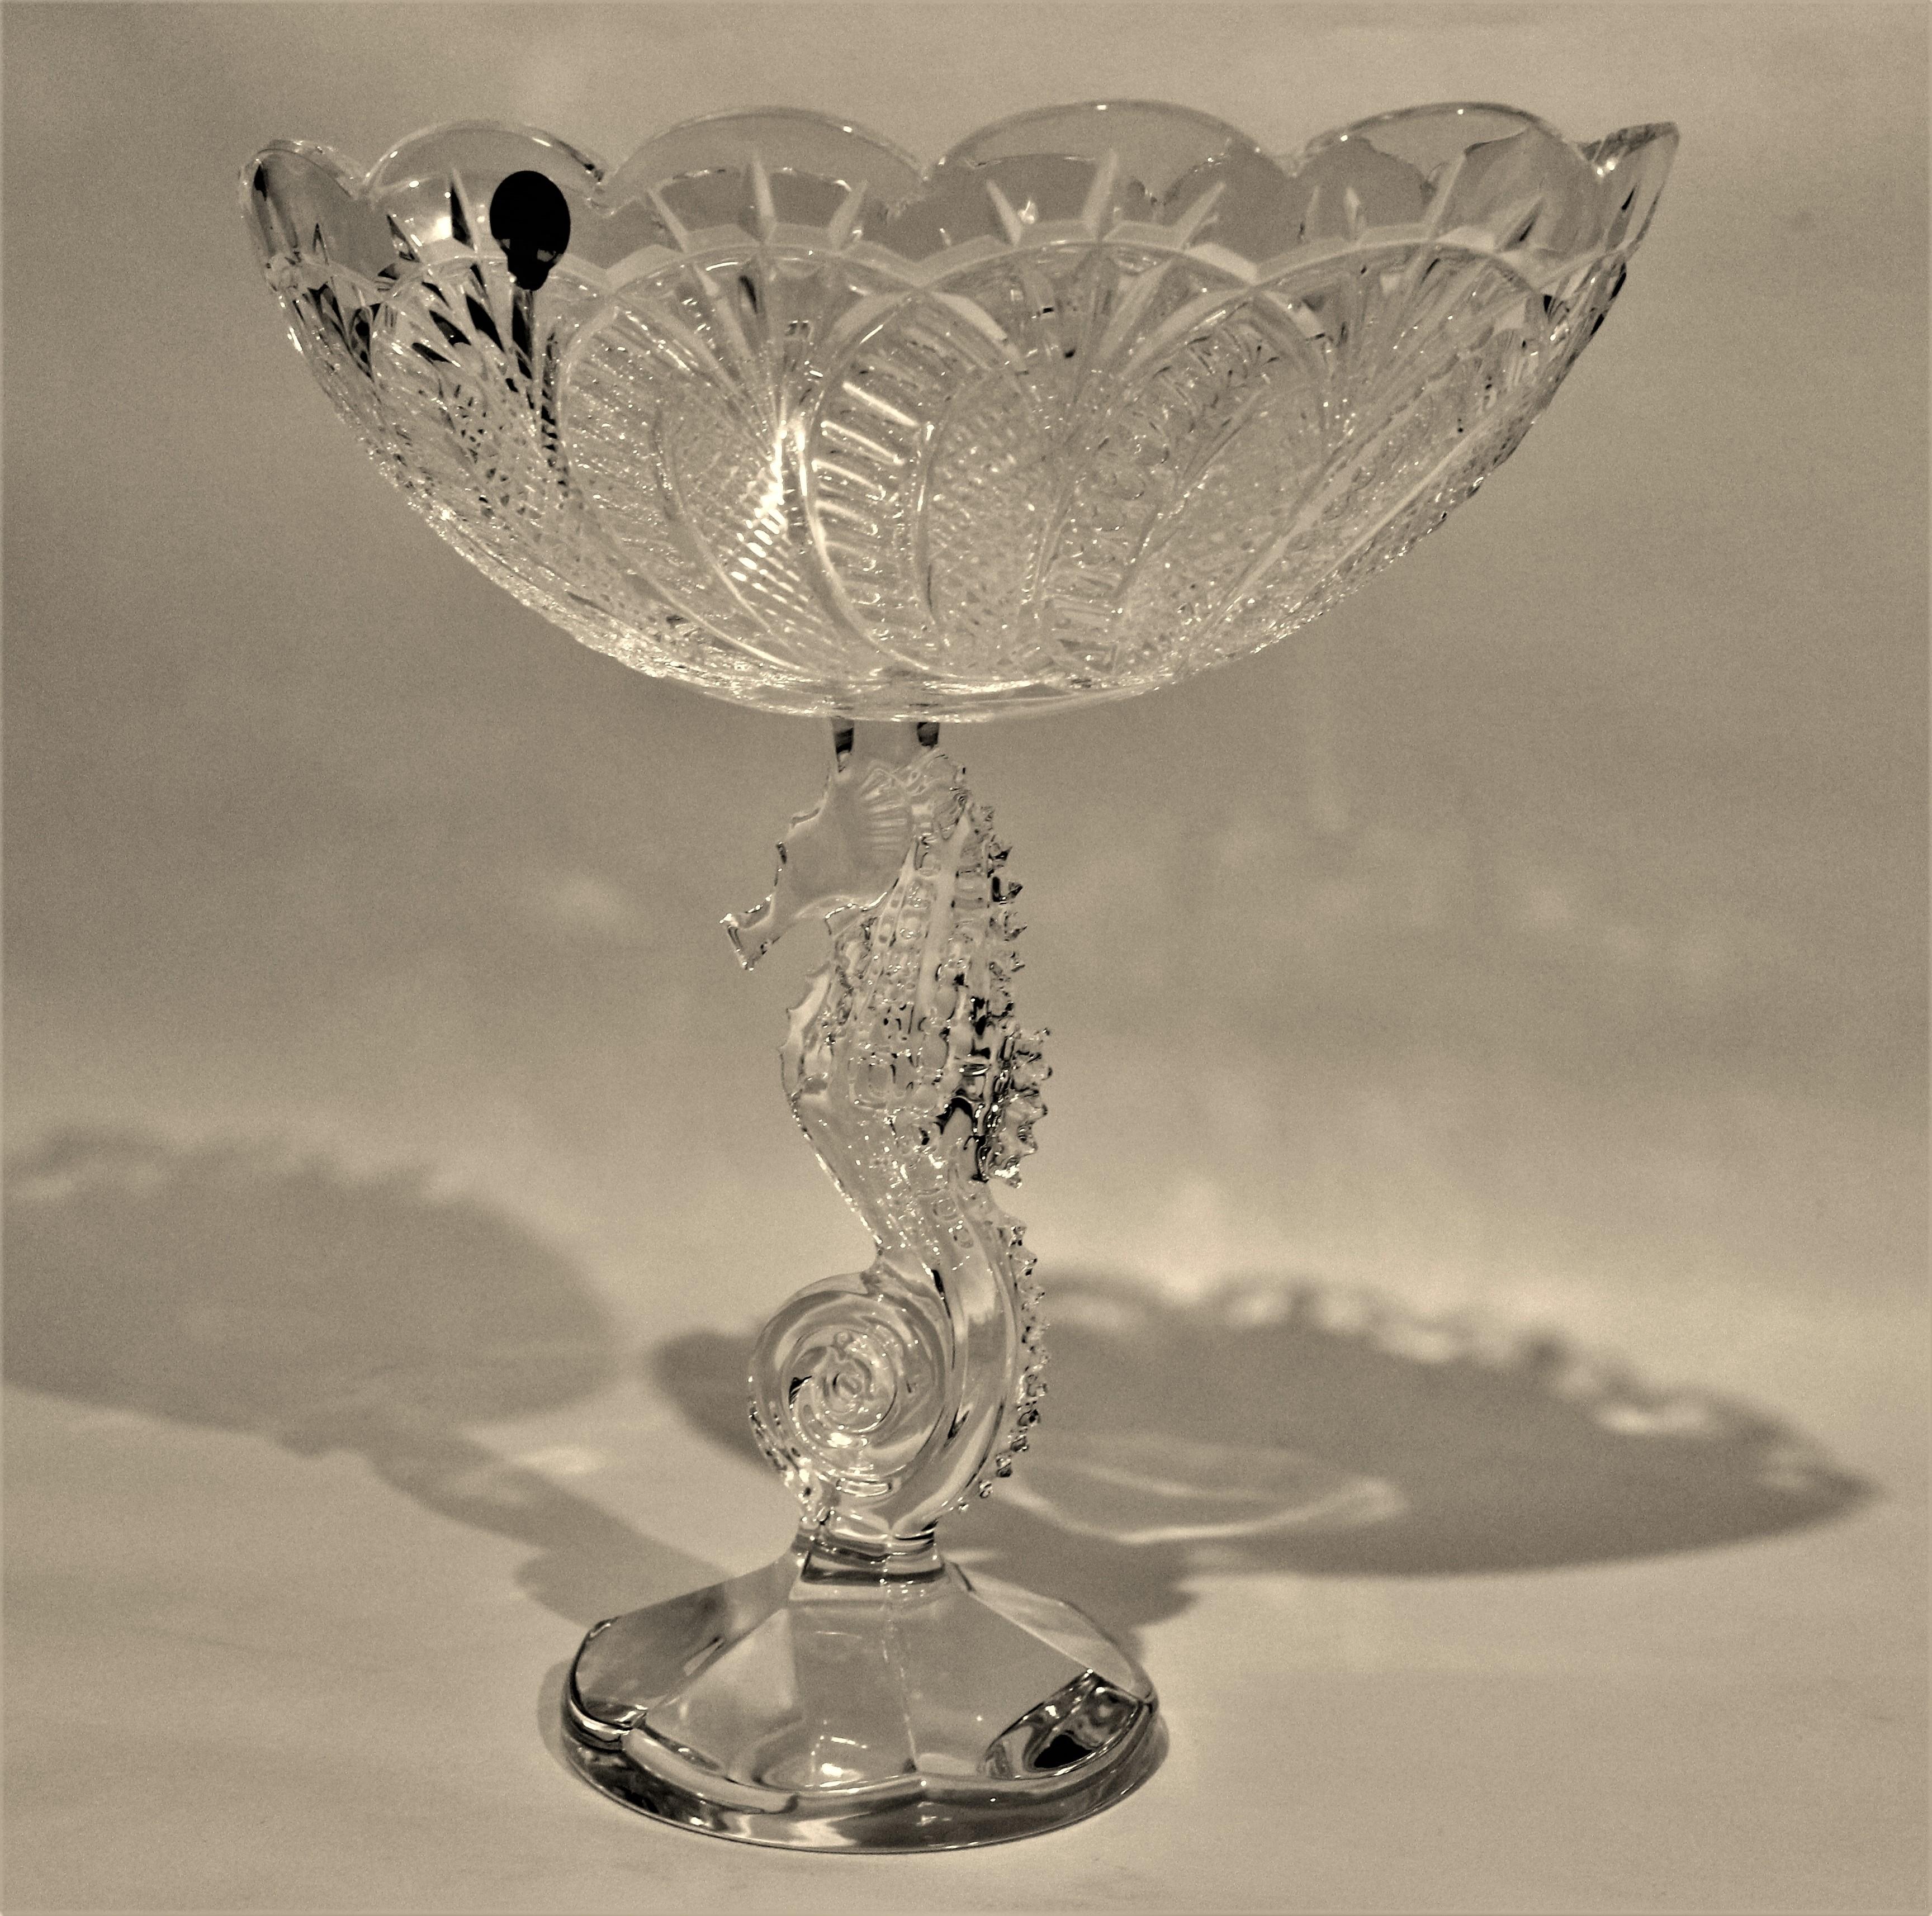 Substantial signed Waterford cut crystal footed centerpiece bowl accented by a figural seahorse in the stem portion of the base. The bowl has scalloped edges around the rim and deep facets that accent the interior. The piece is signed with the foil